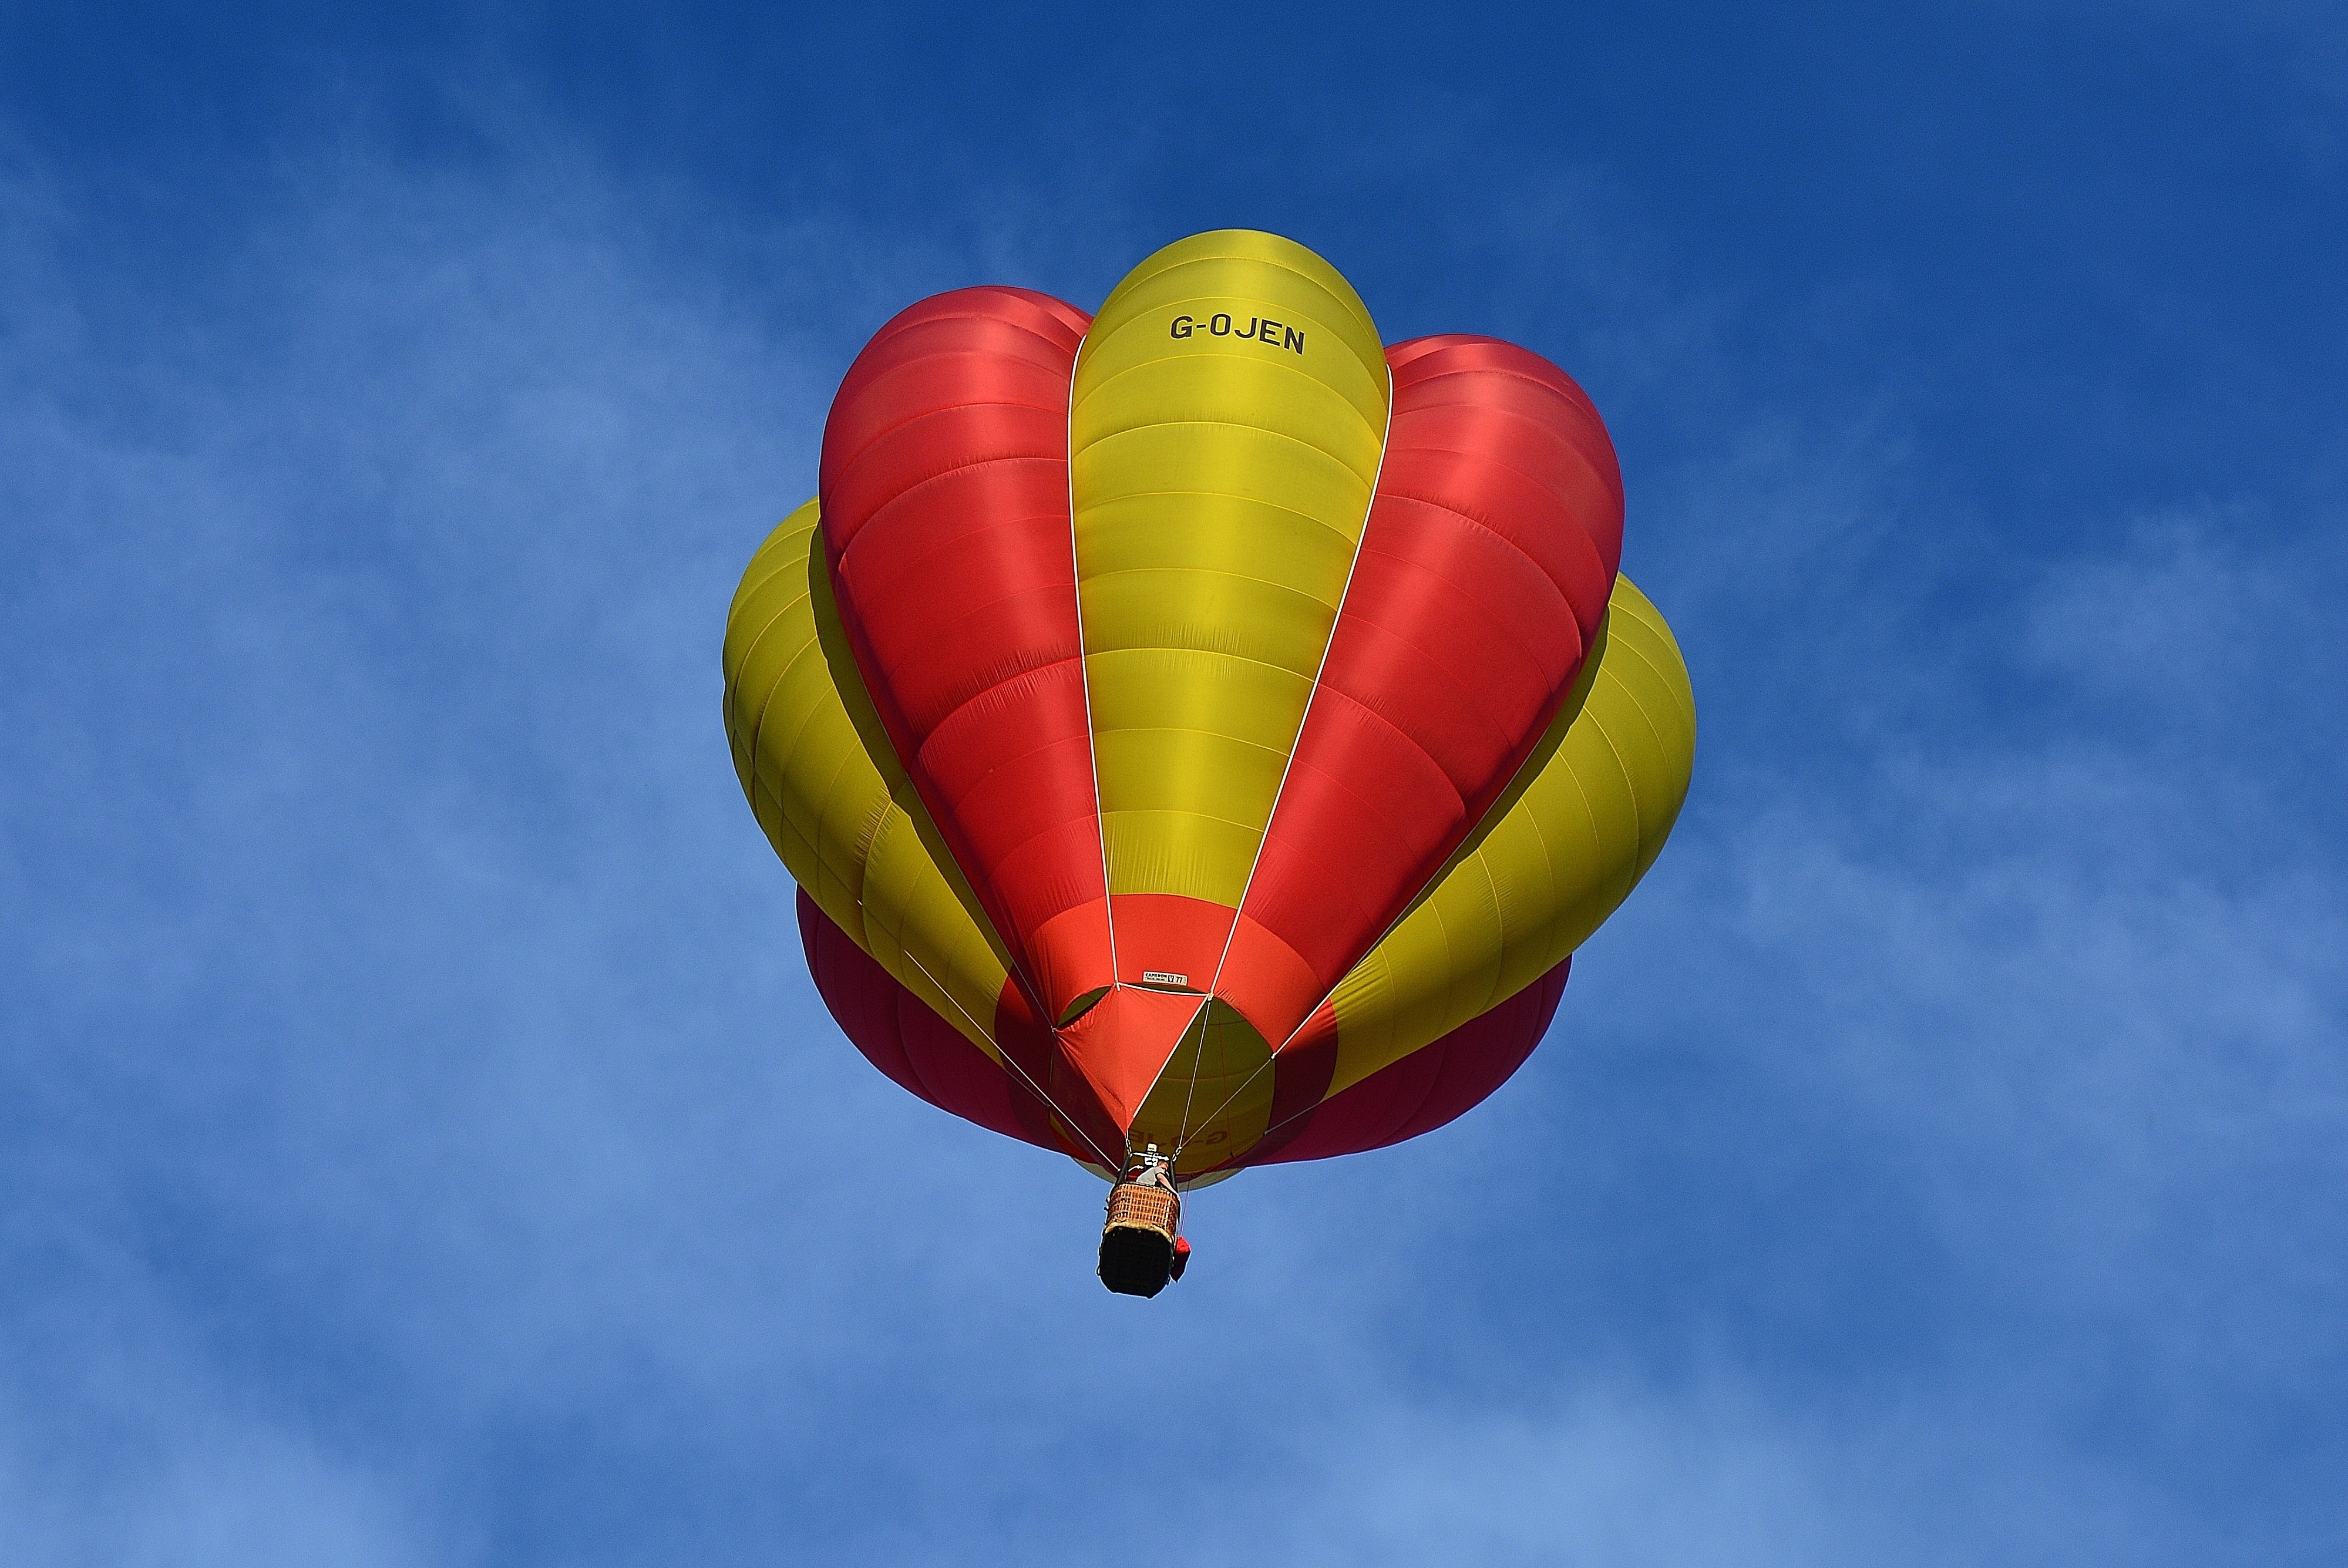 Yellow and red hot air balloon in sky photo